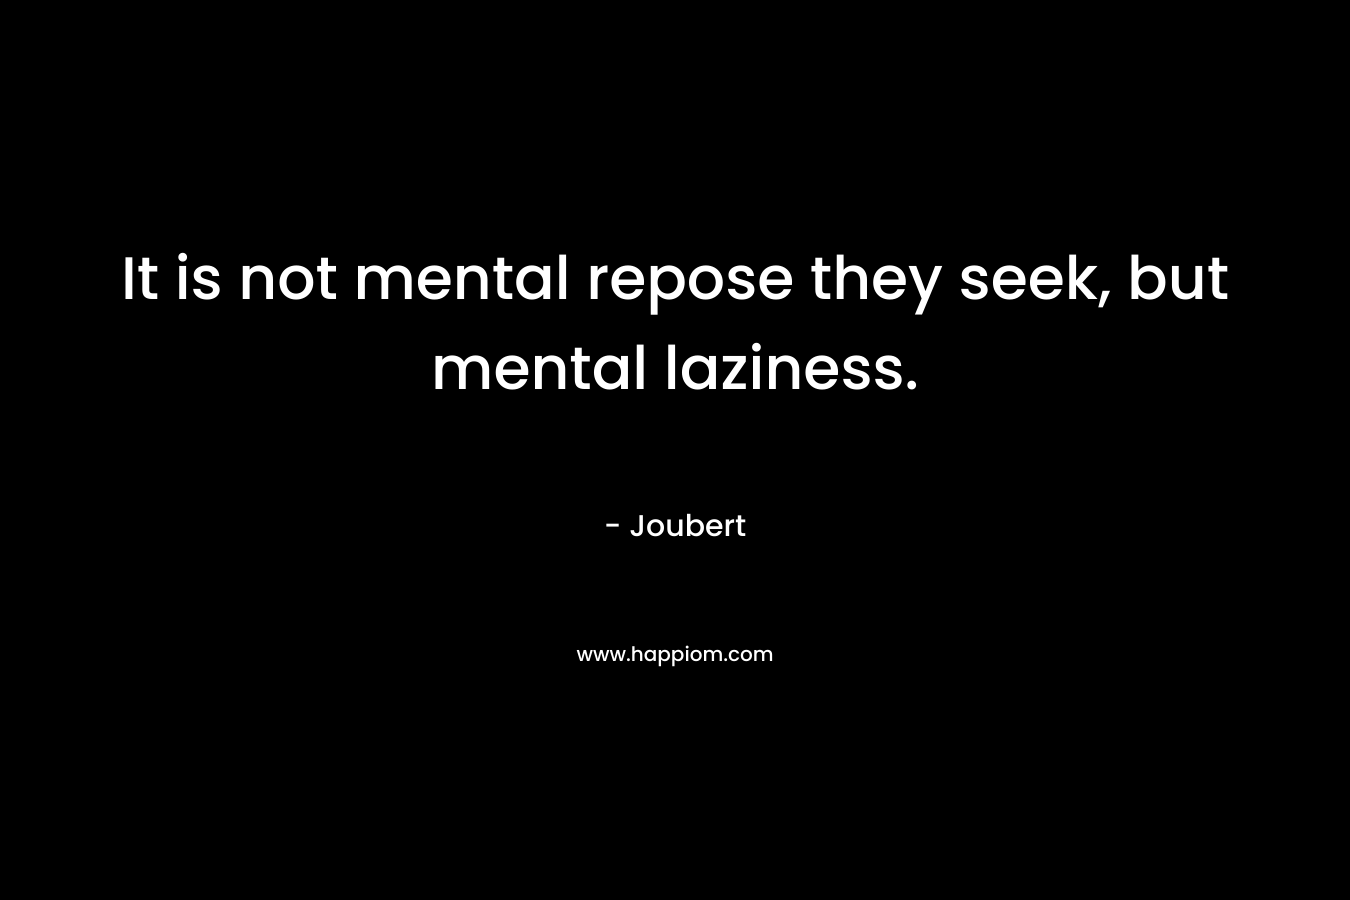 It is not mental repose they seek, but mental laziness.